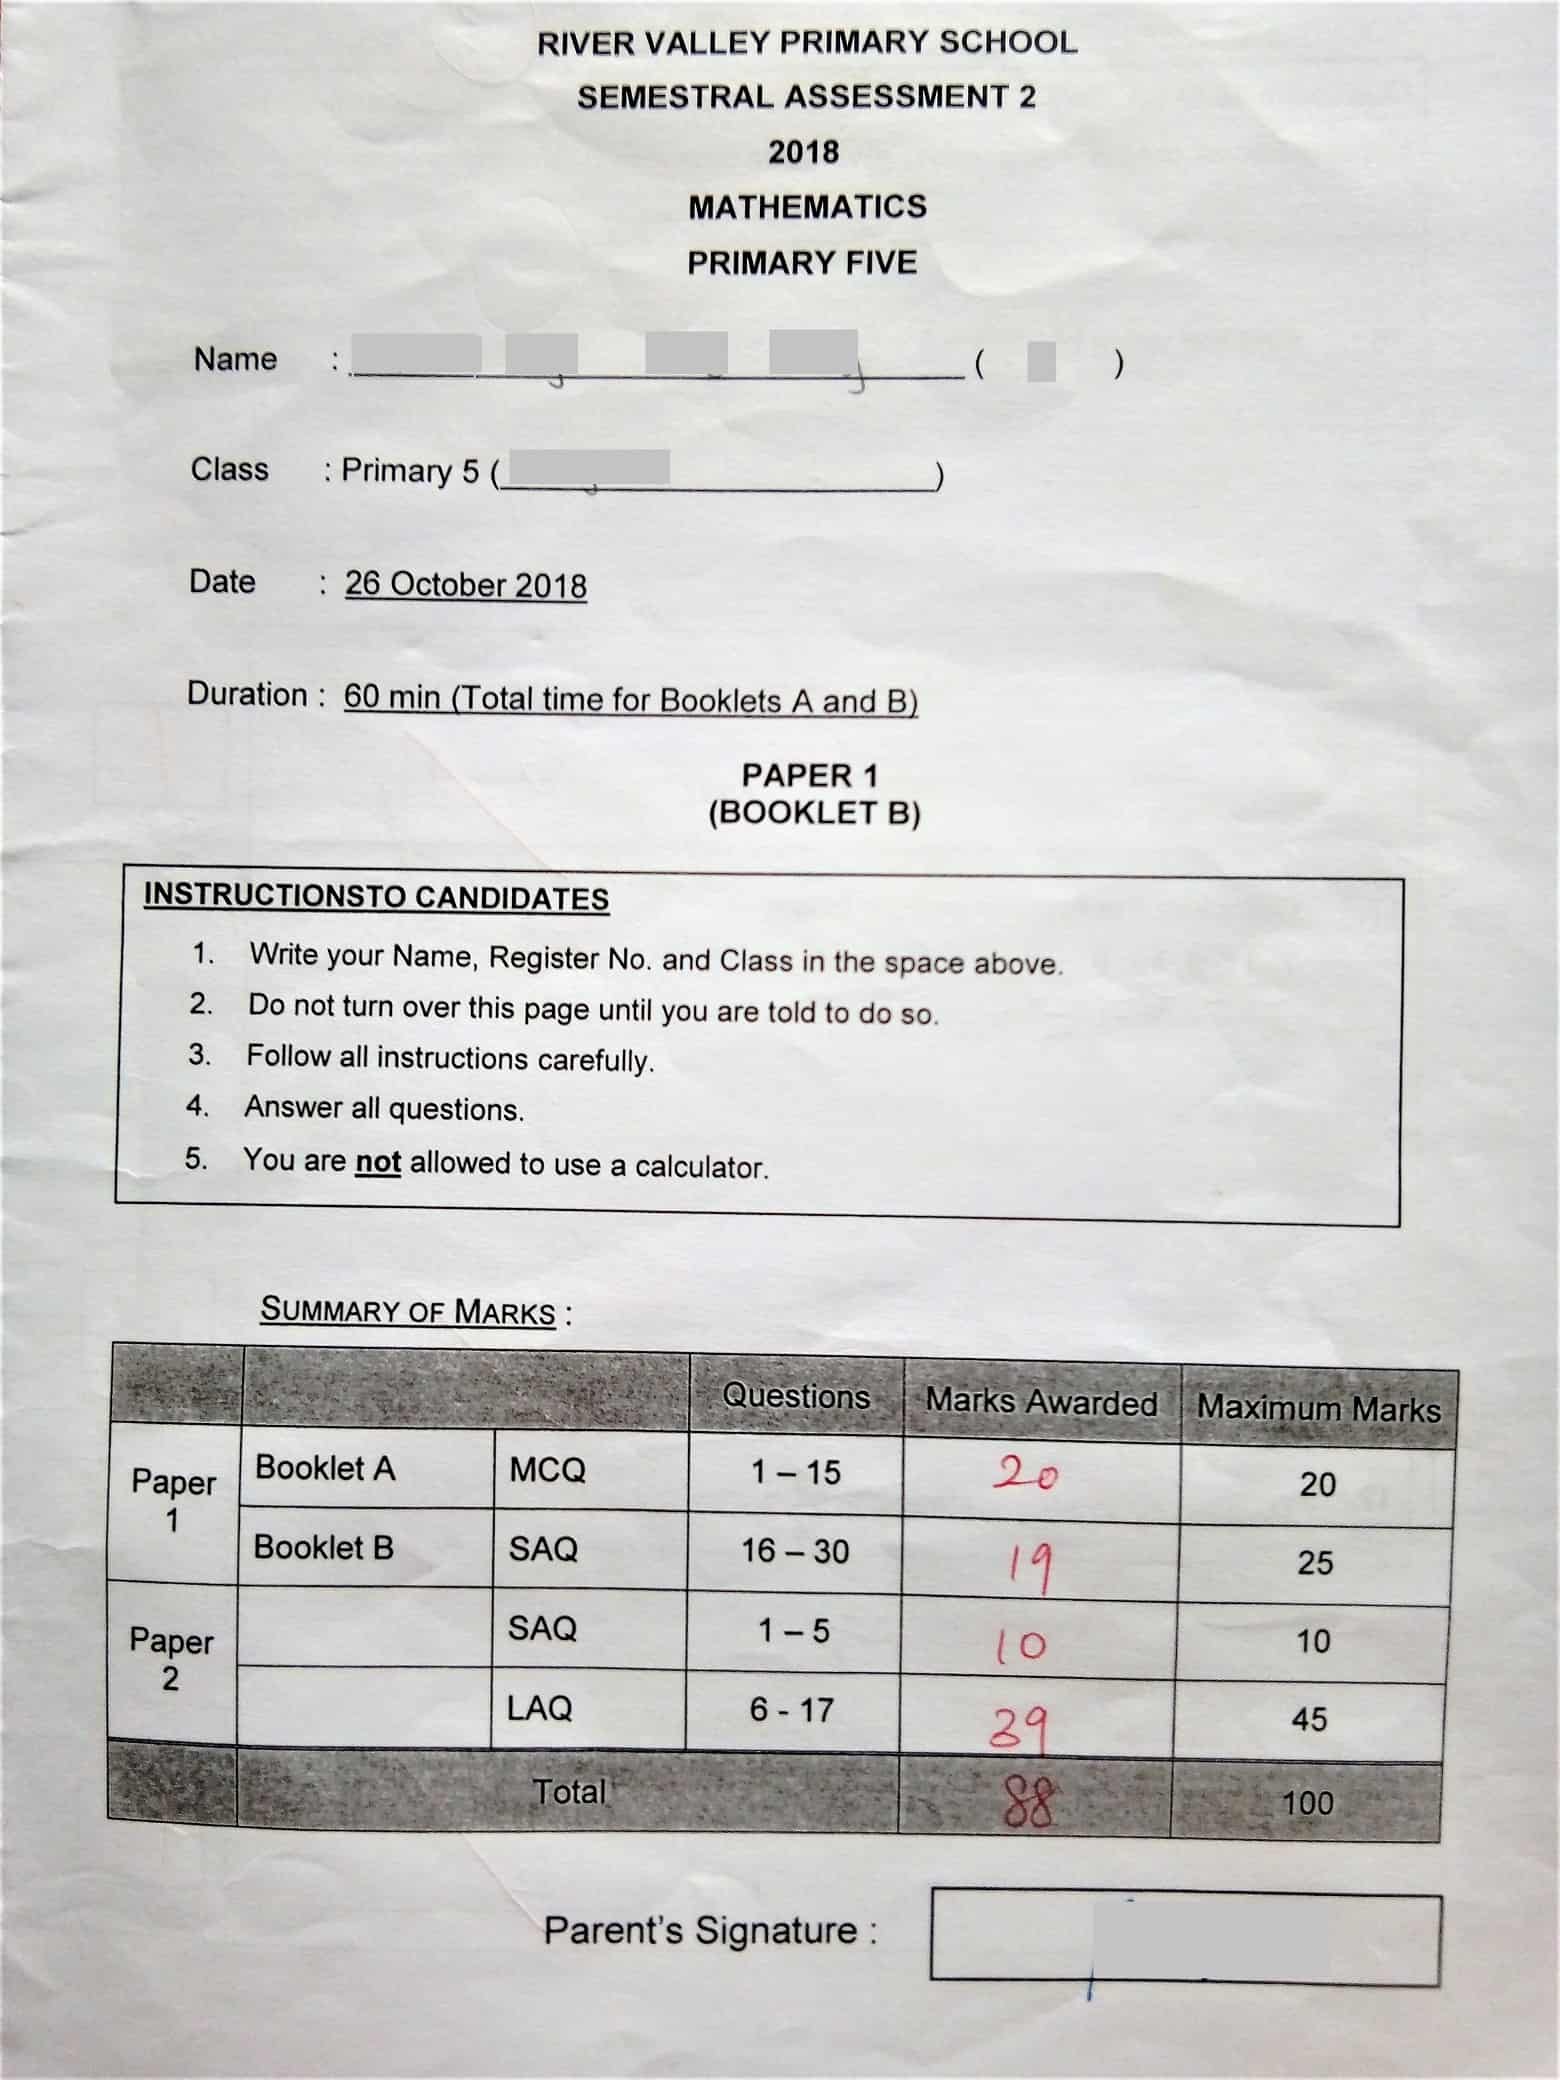 River Valley Primary School Semestral Assessment 2 2018 Mathematics Primary Five 88/100 with private tuition